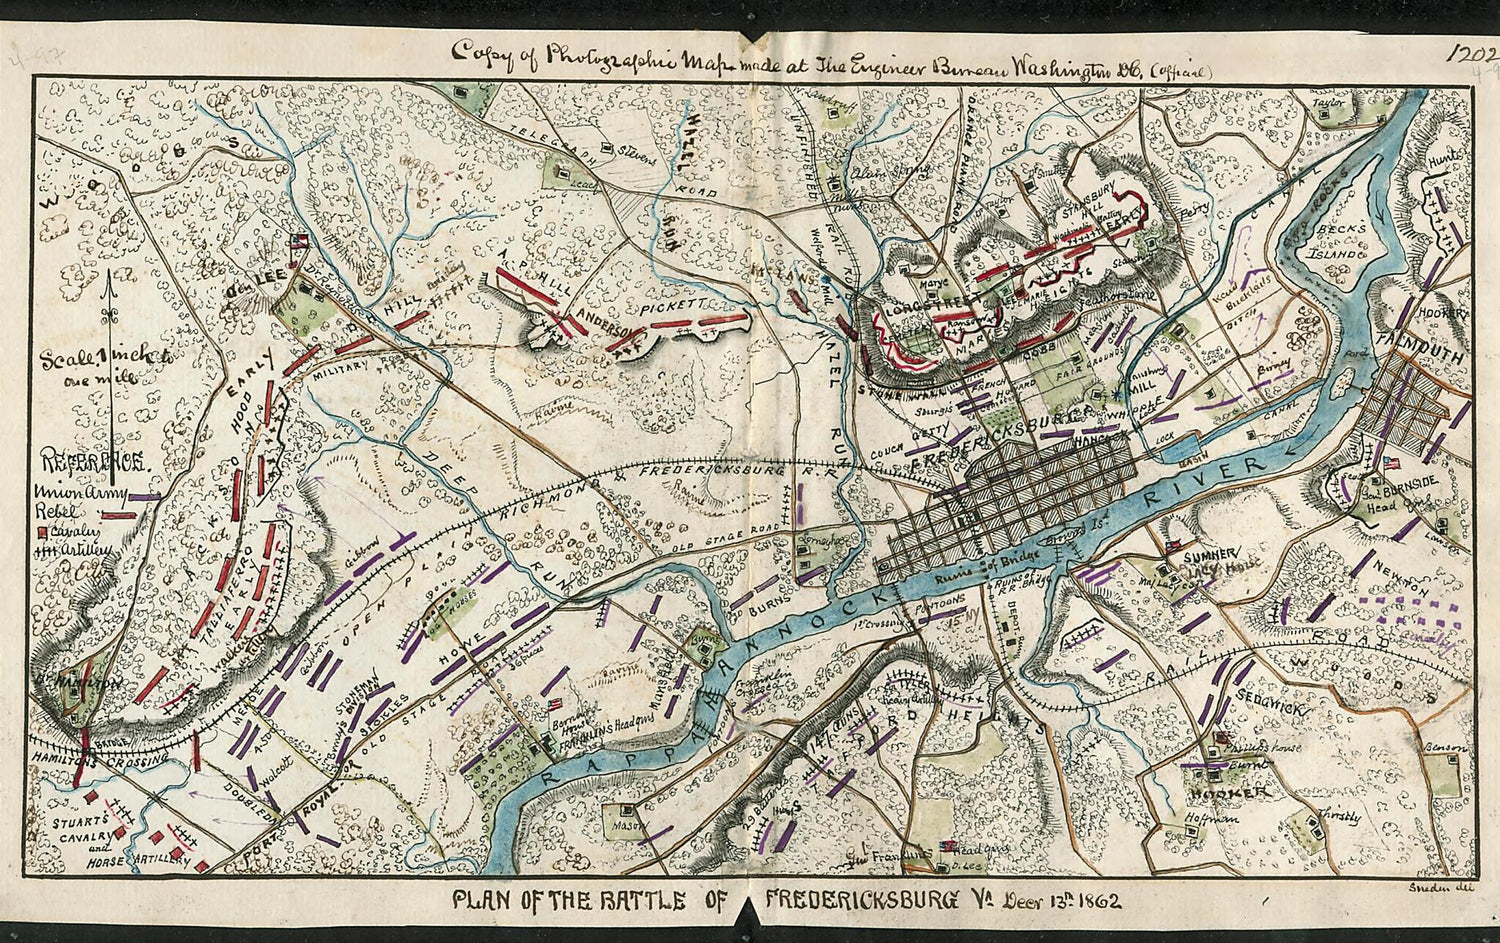 This old map of Plan of the Battle of Fredericksburg, Va., Decr. 13, 1862 from 12-13 was created by Robert Knox Sneden in 12-13